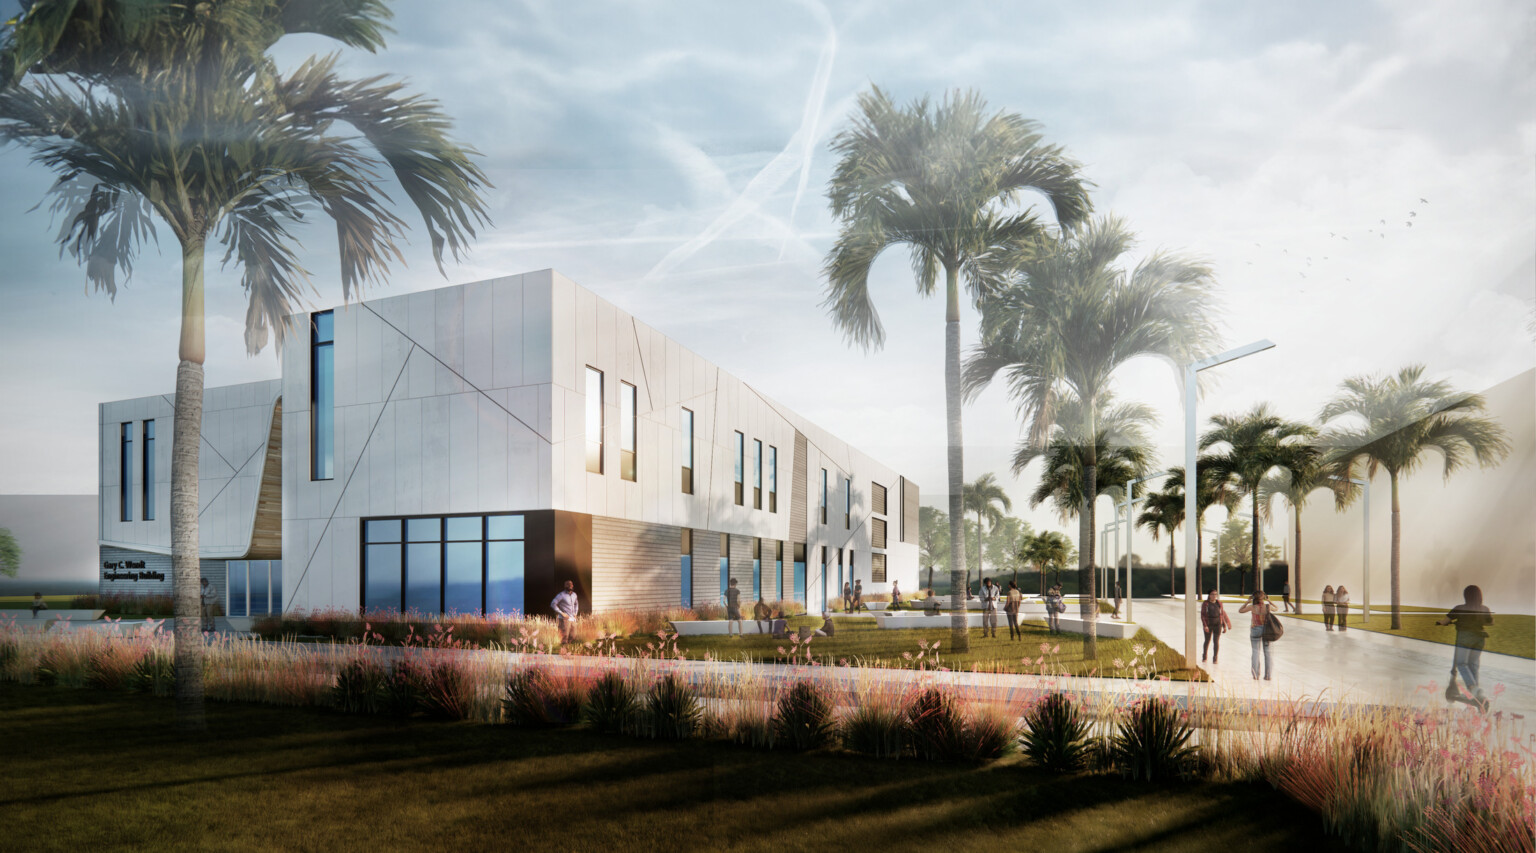 Rendering of a multi-story college building surrounded by palm trees and landscaping